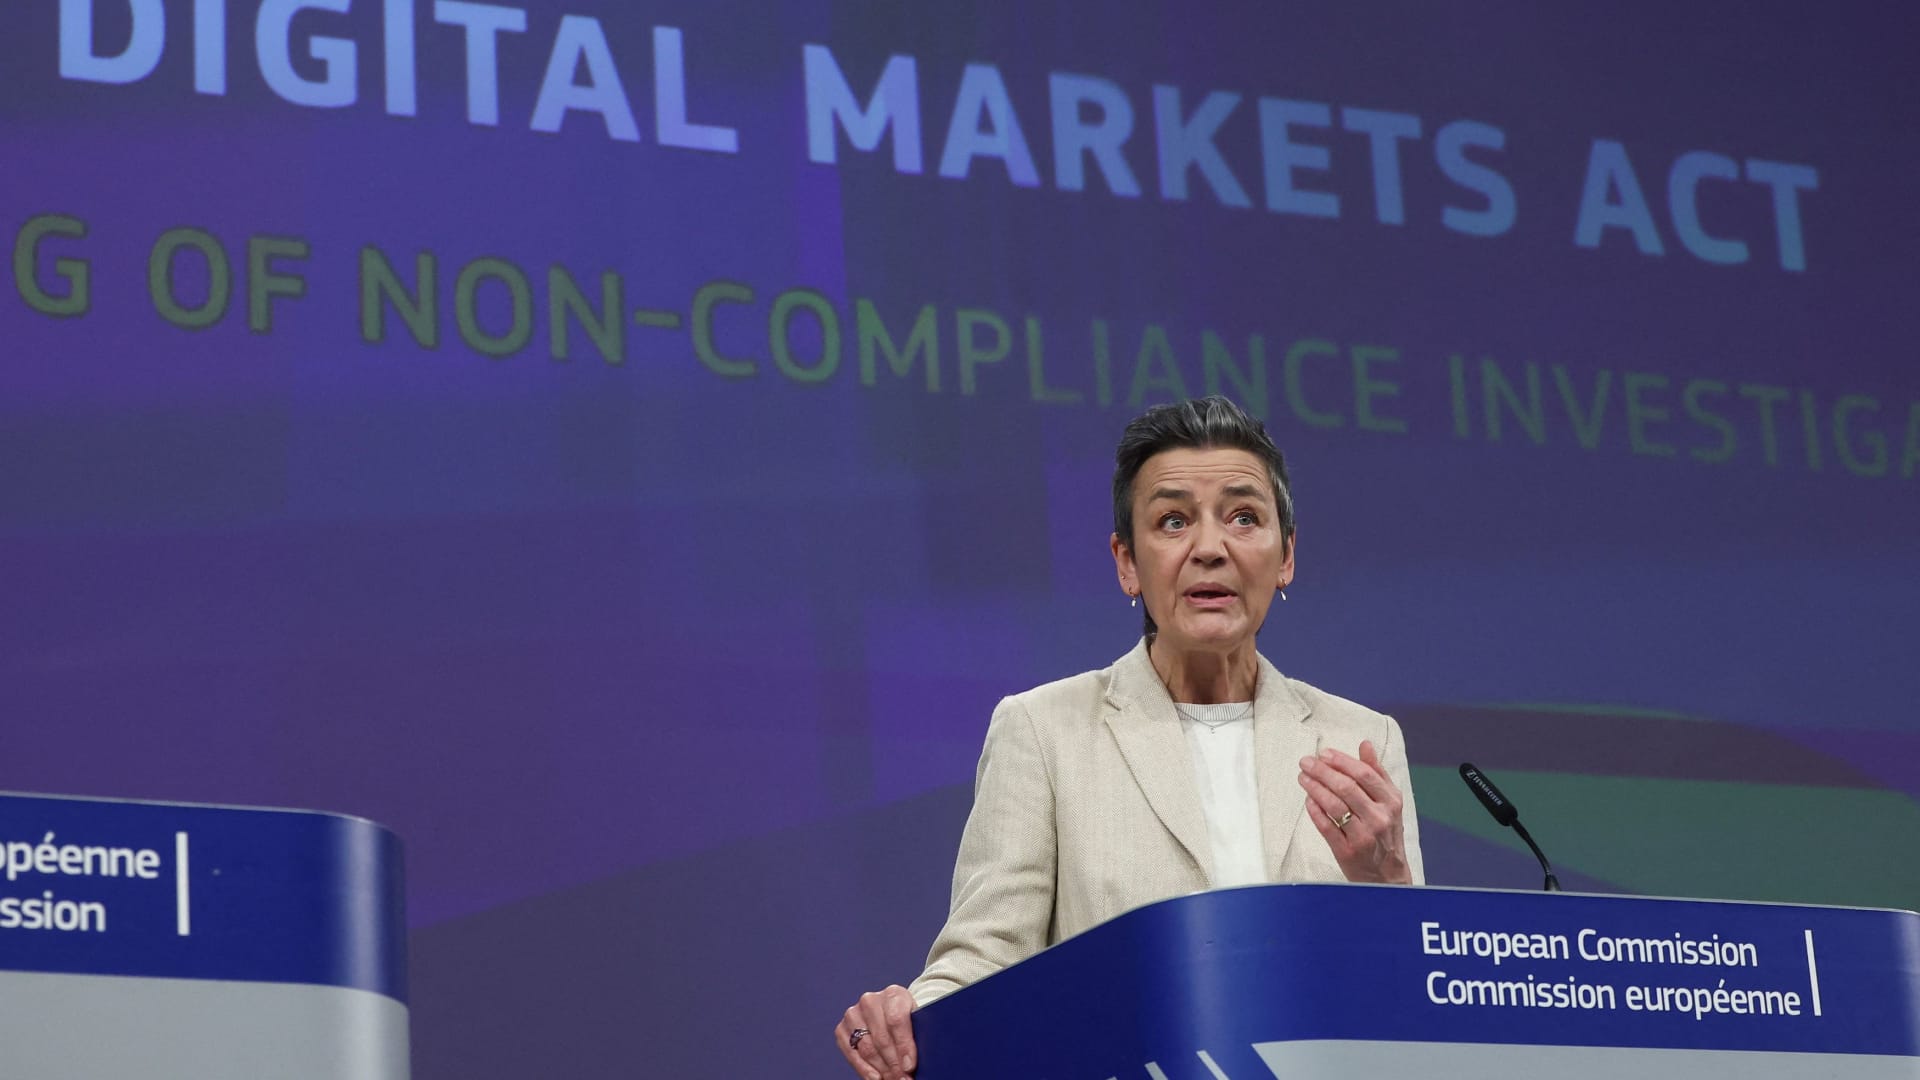 Apple issues 'very serious' under landmark EU rules: Vestager